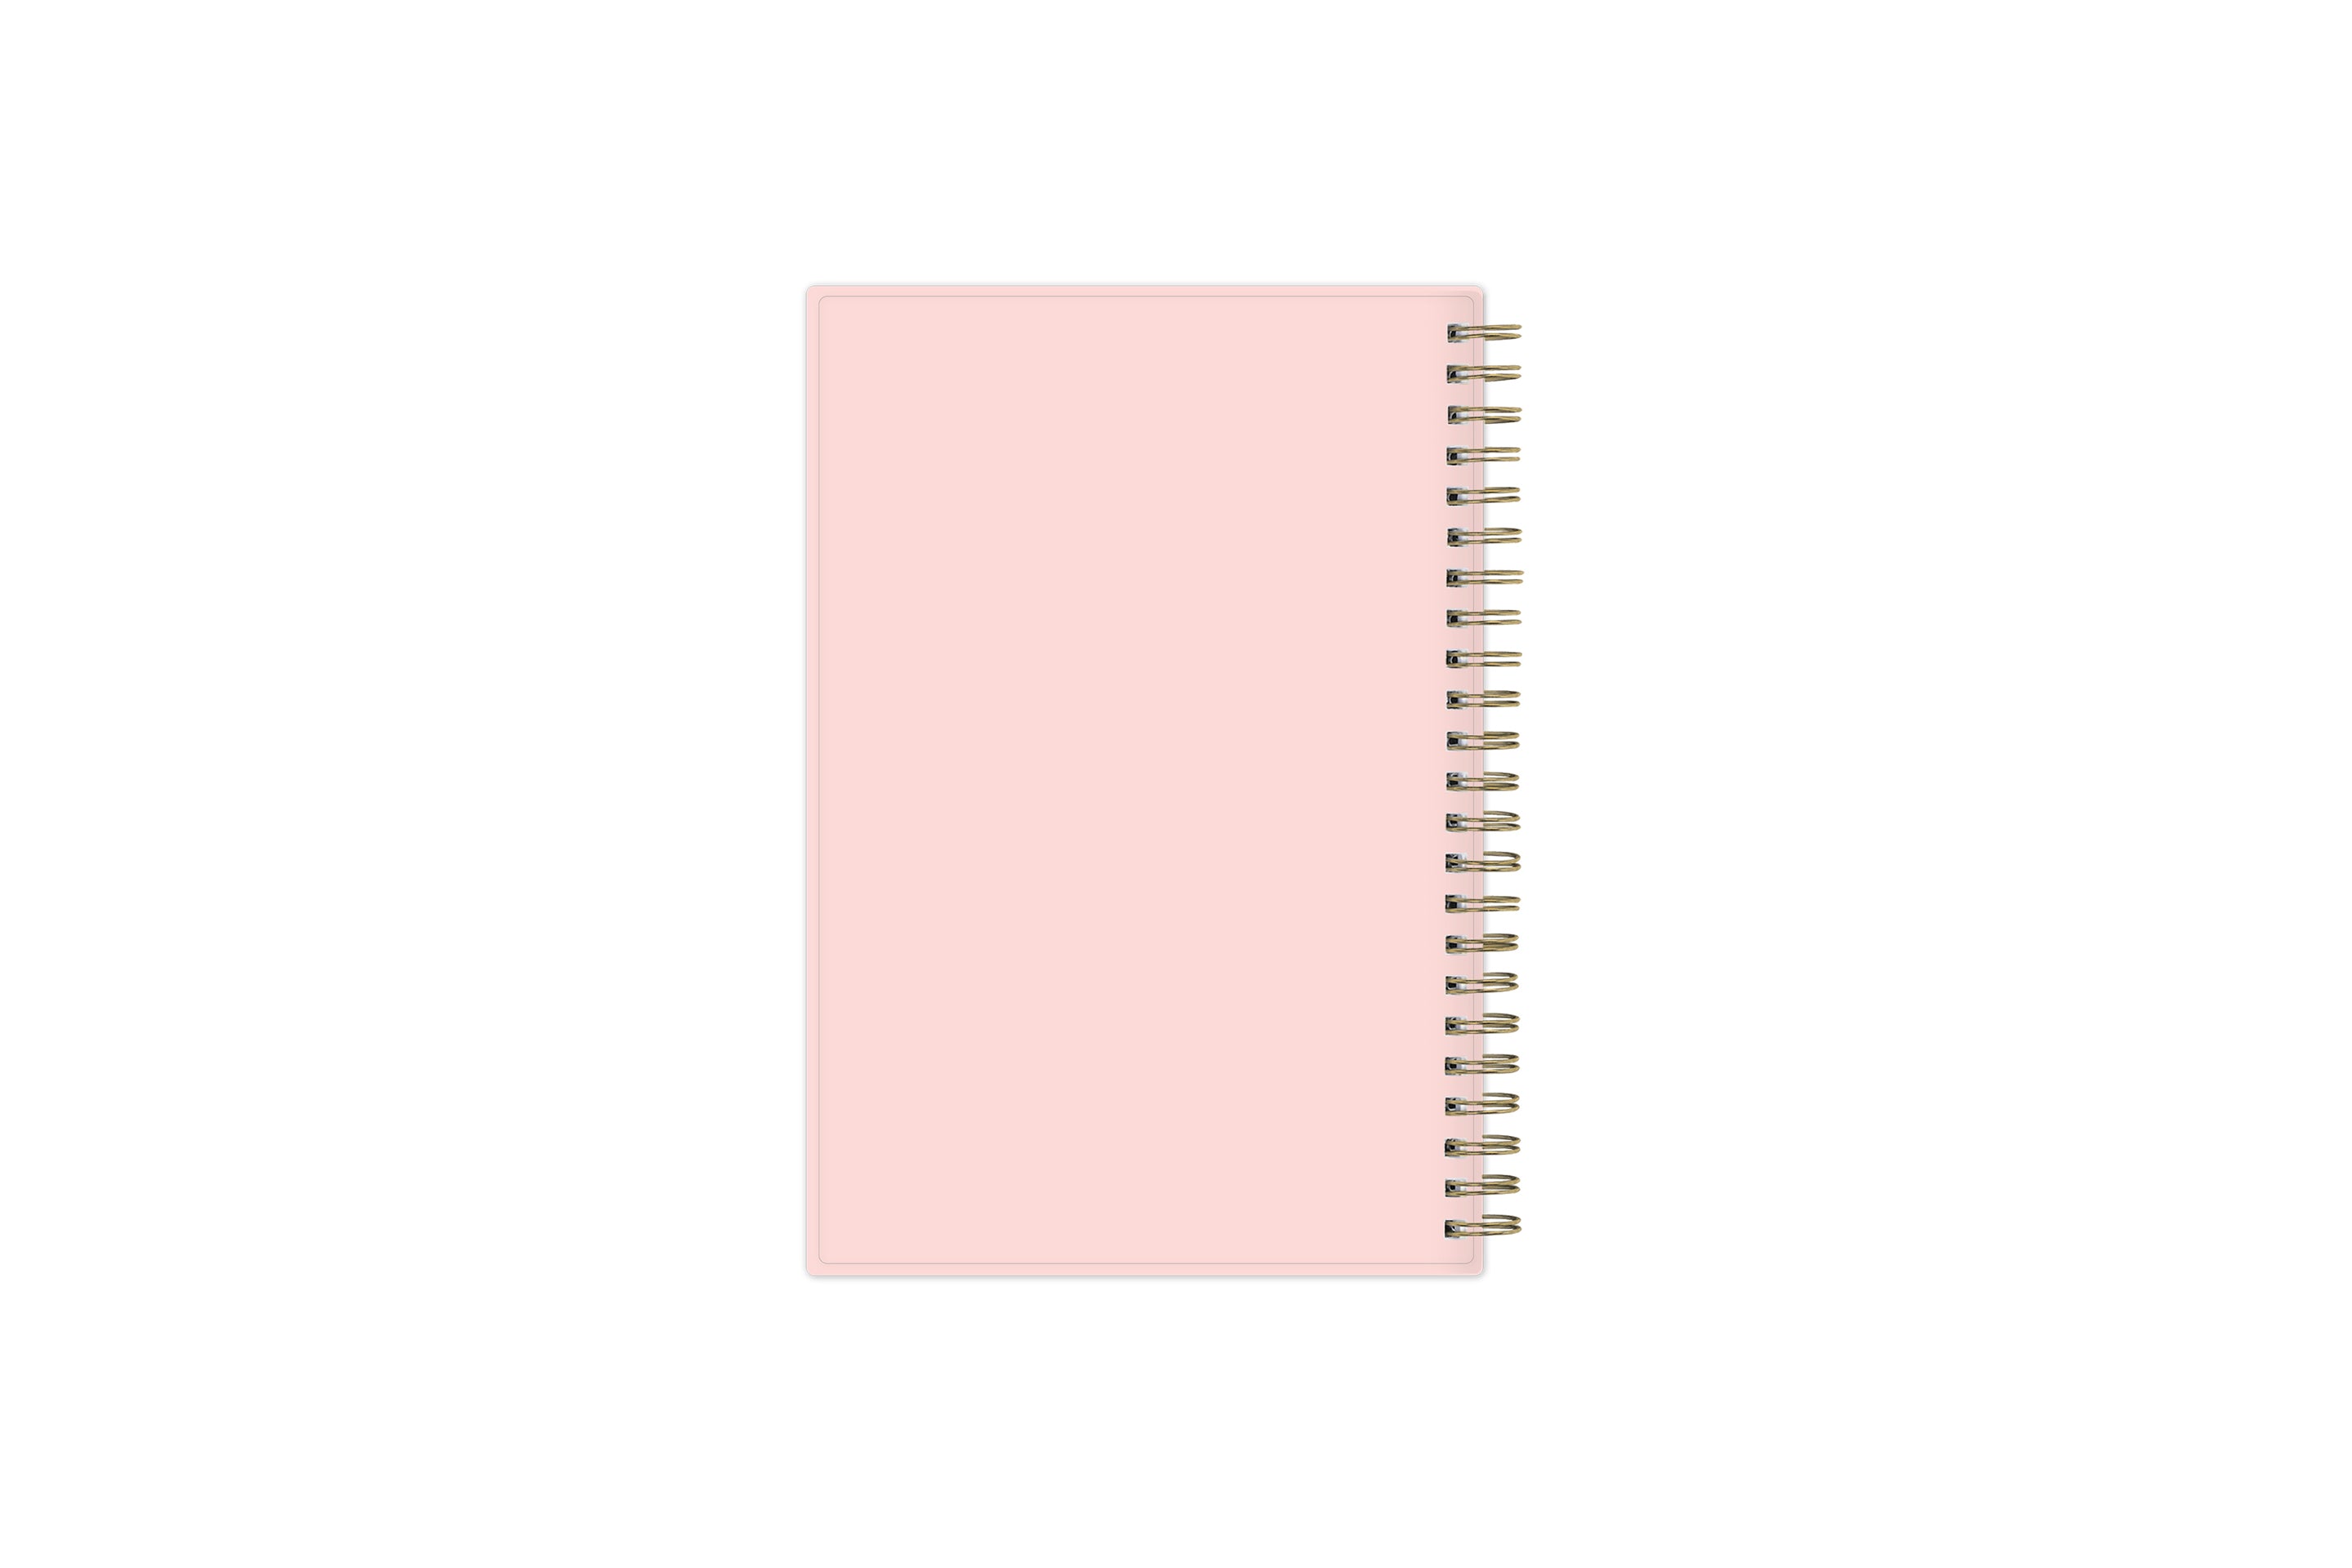 the 2023 weekly monthly planner features a soft pink back cover with gold twin wire-o binding